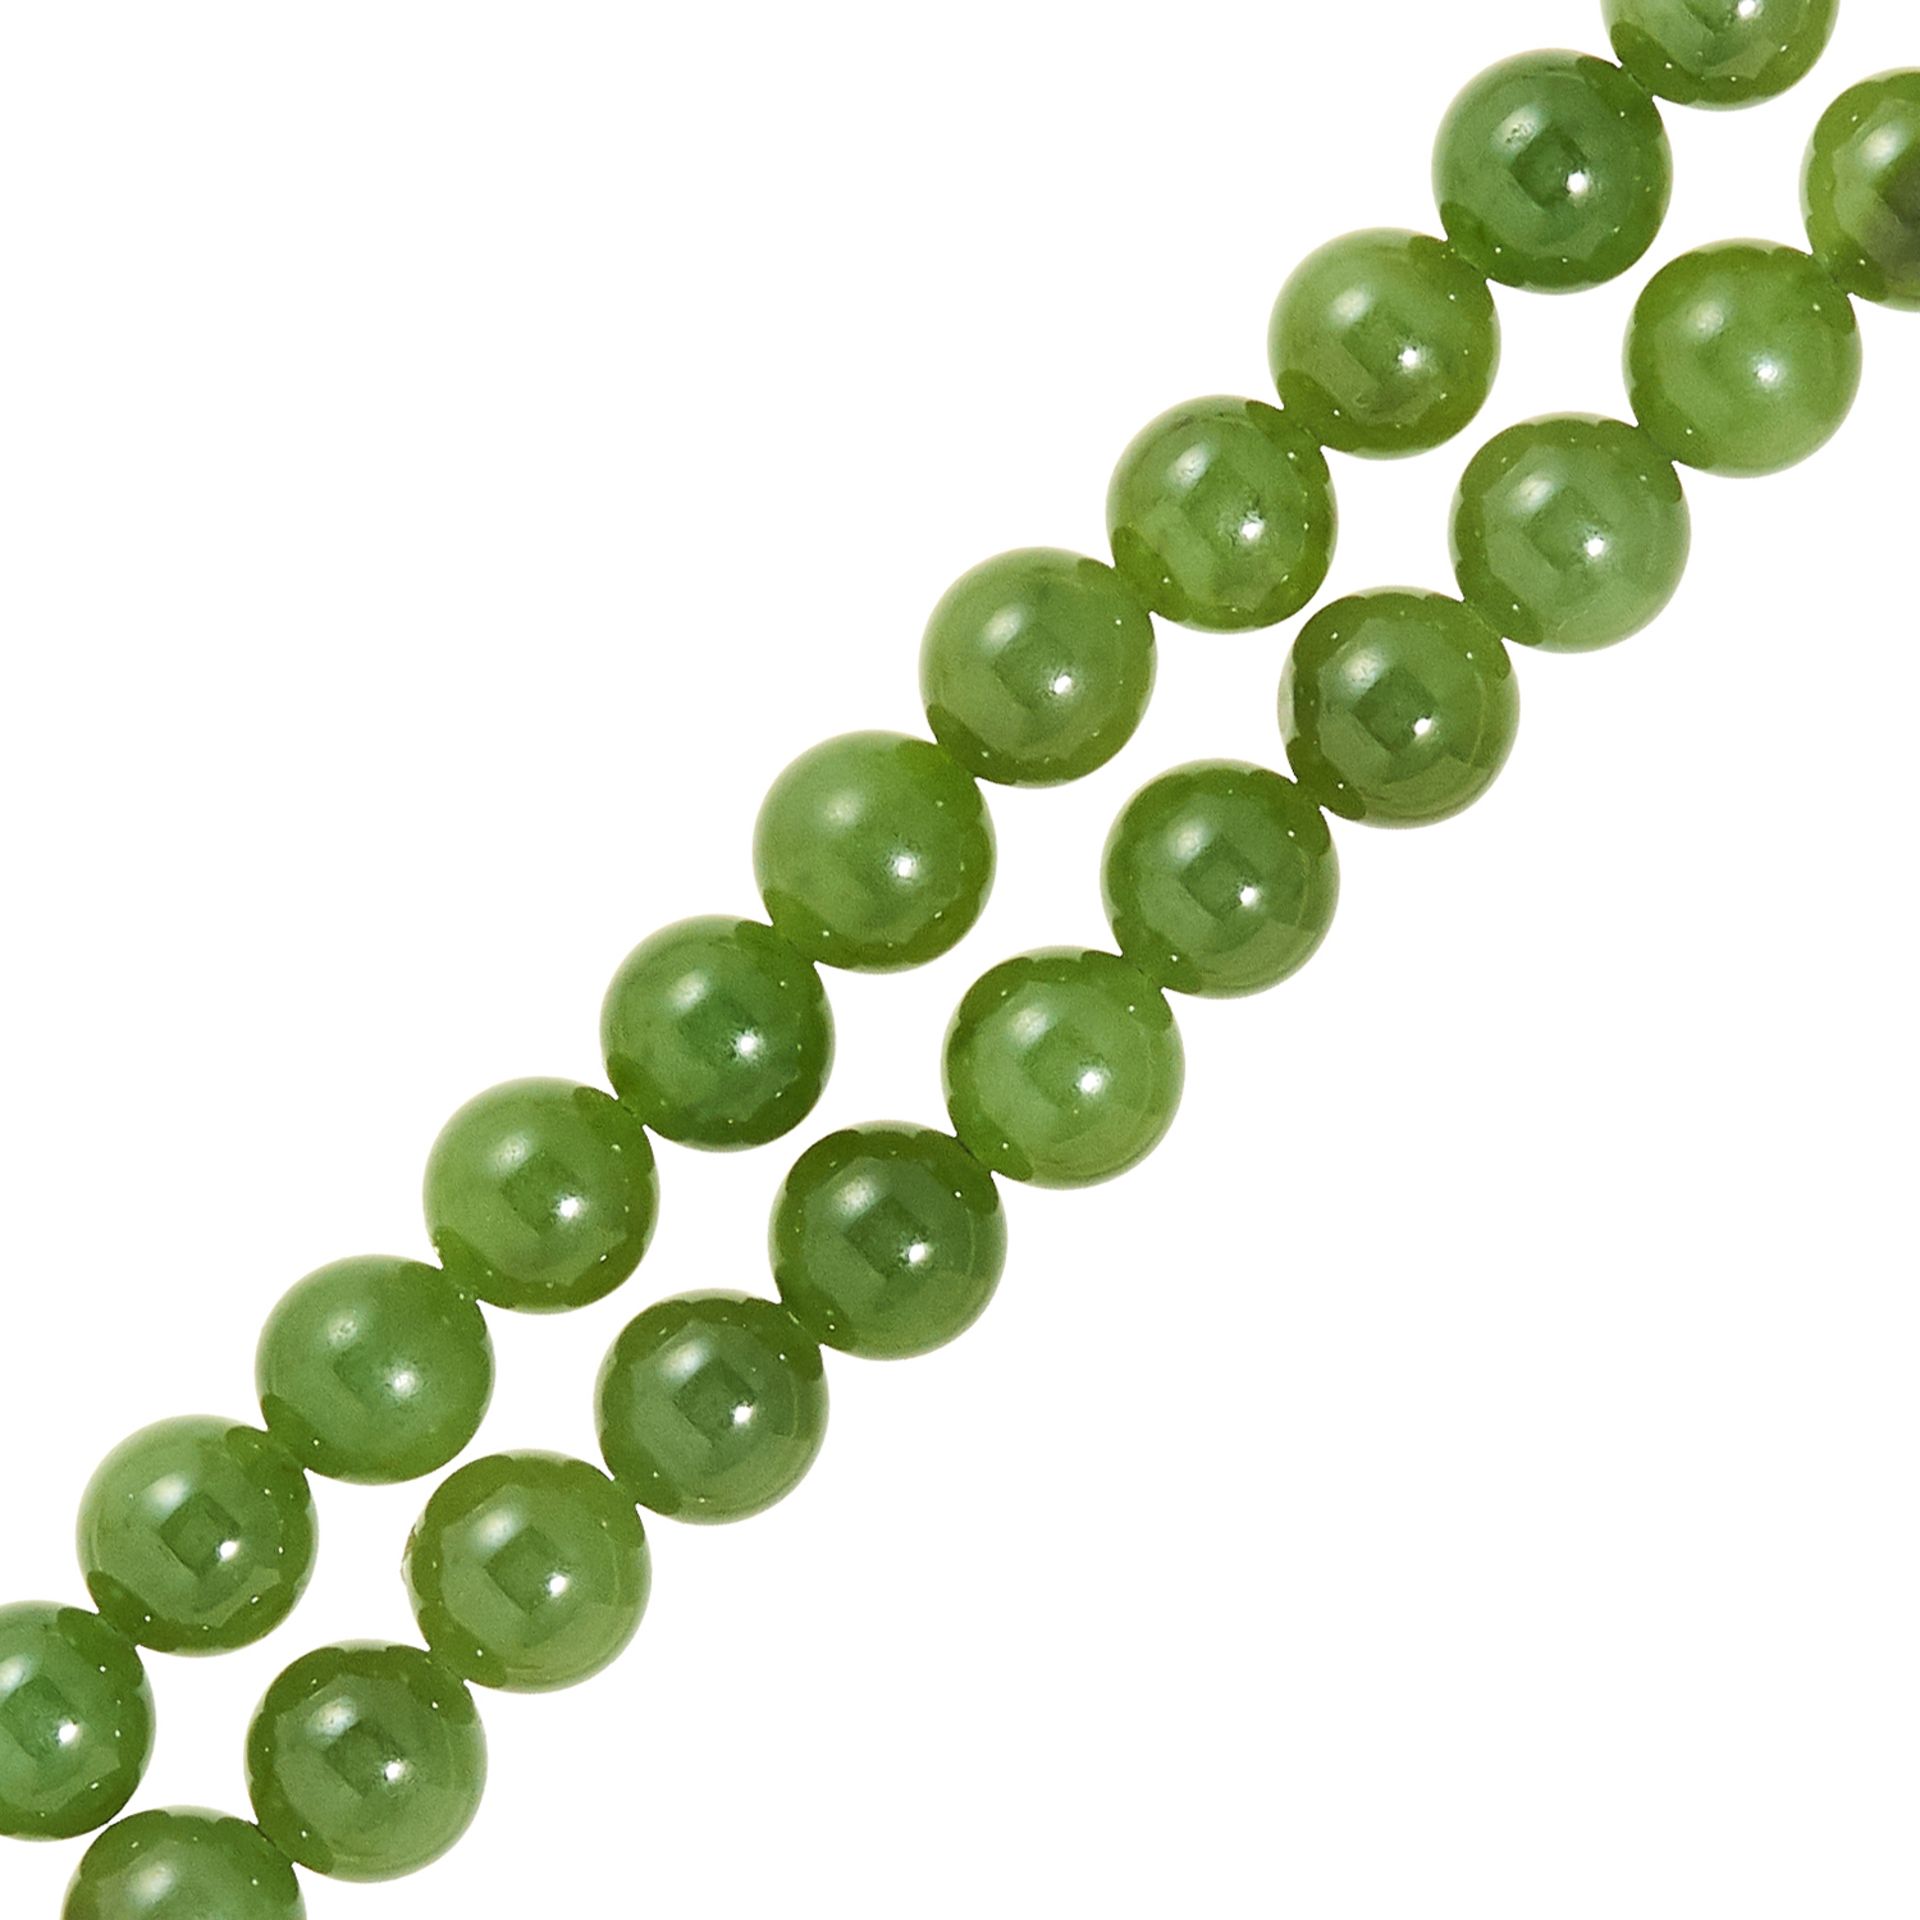 JADE BEAD BRACELET comprising of two rows of polished jade beads, 17cm, 31.81g. - Image 2 of 2